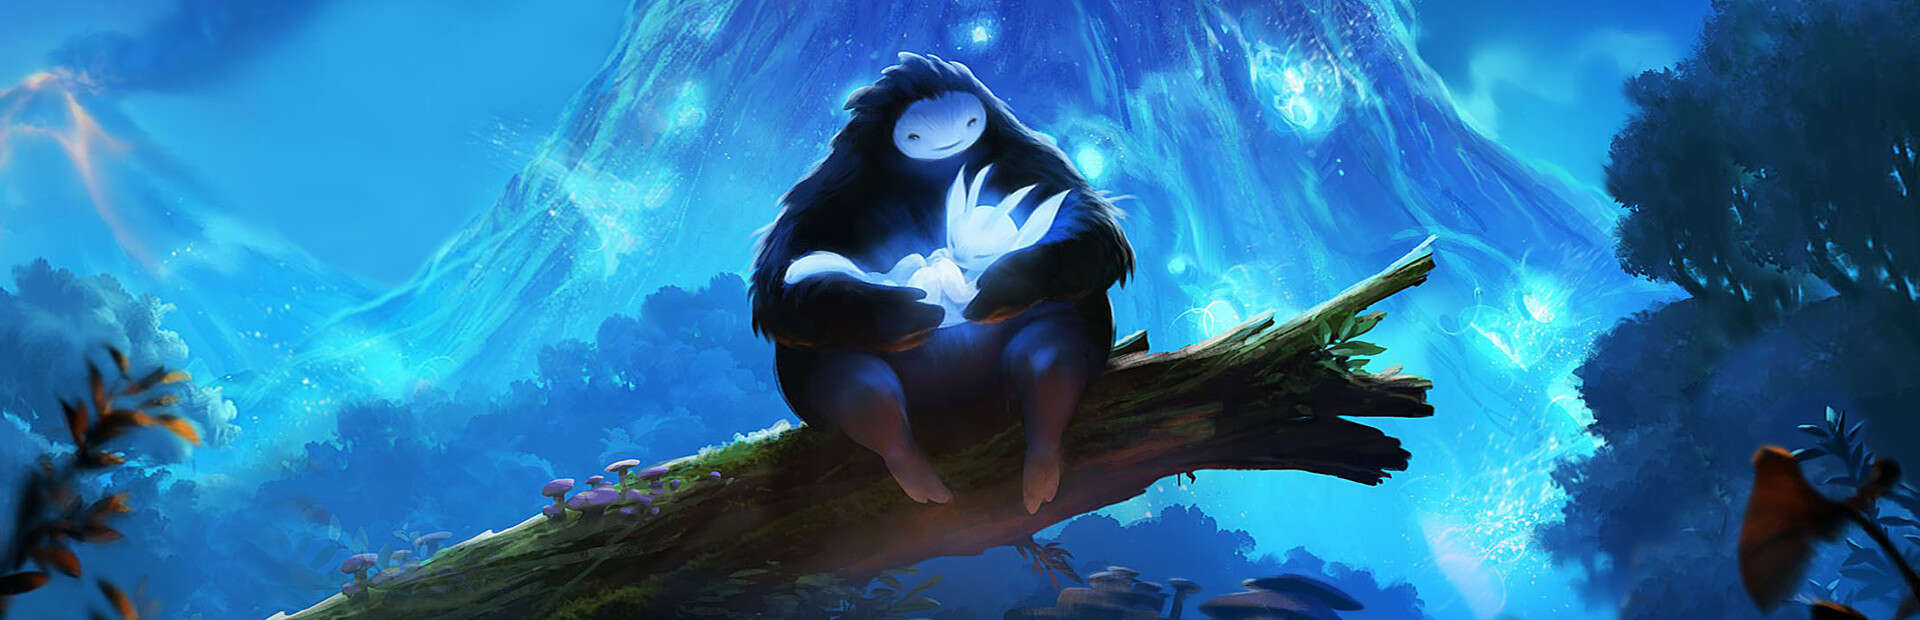 Artwork from Ori and the Blind Forest